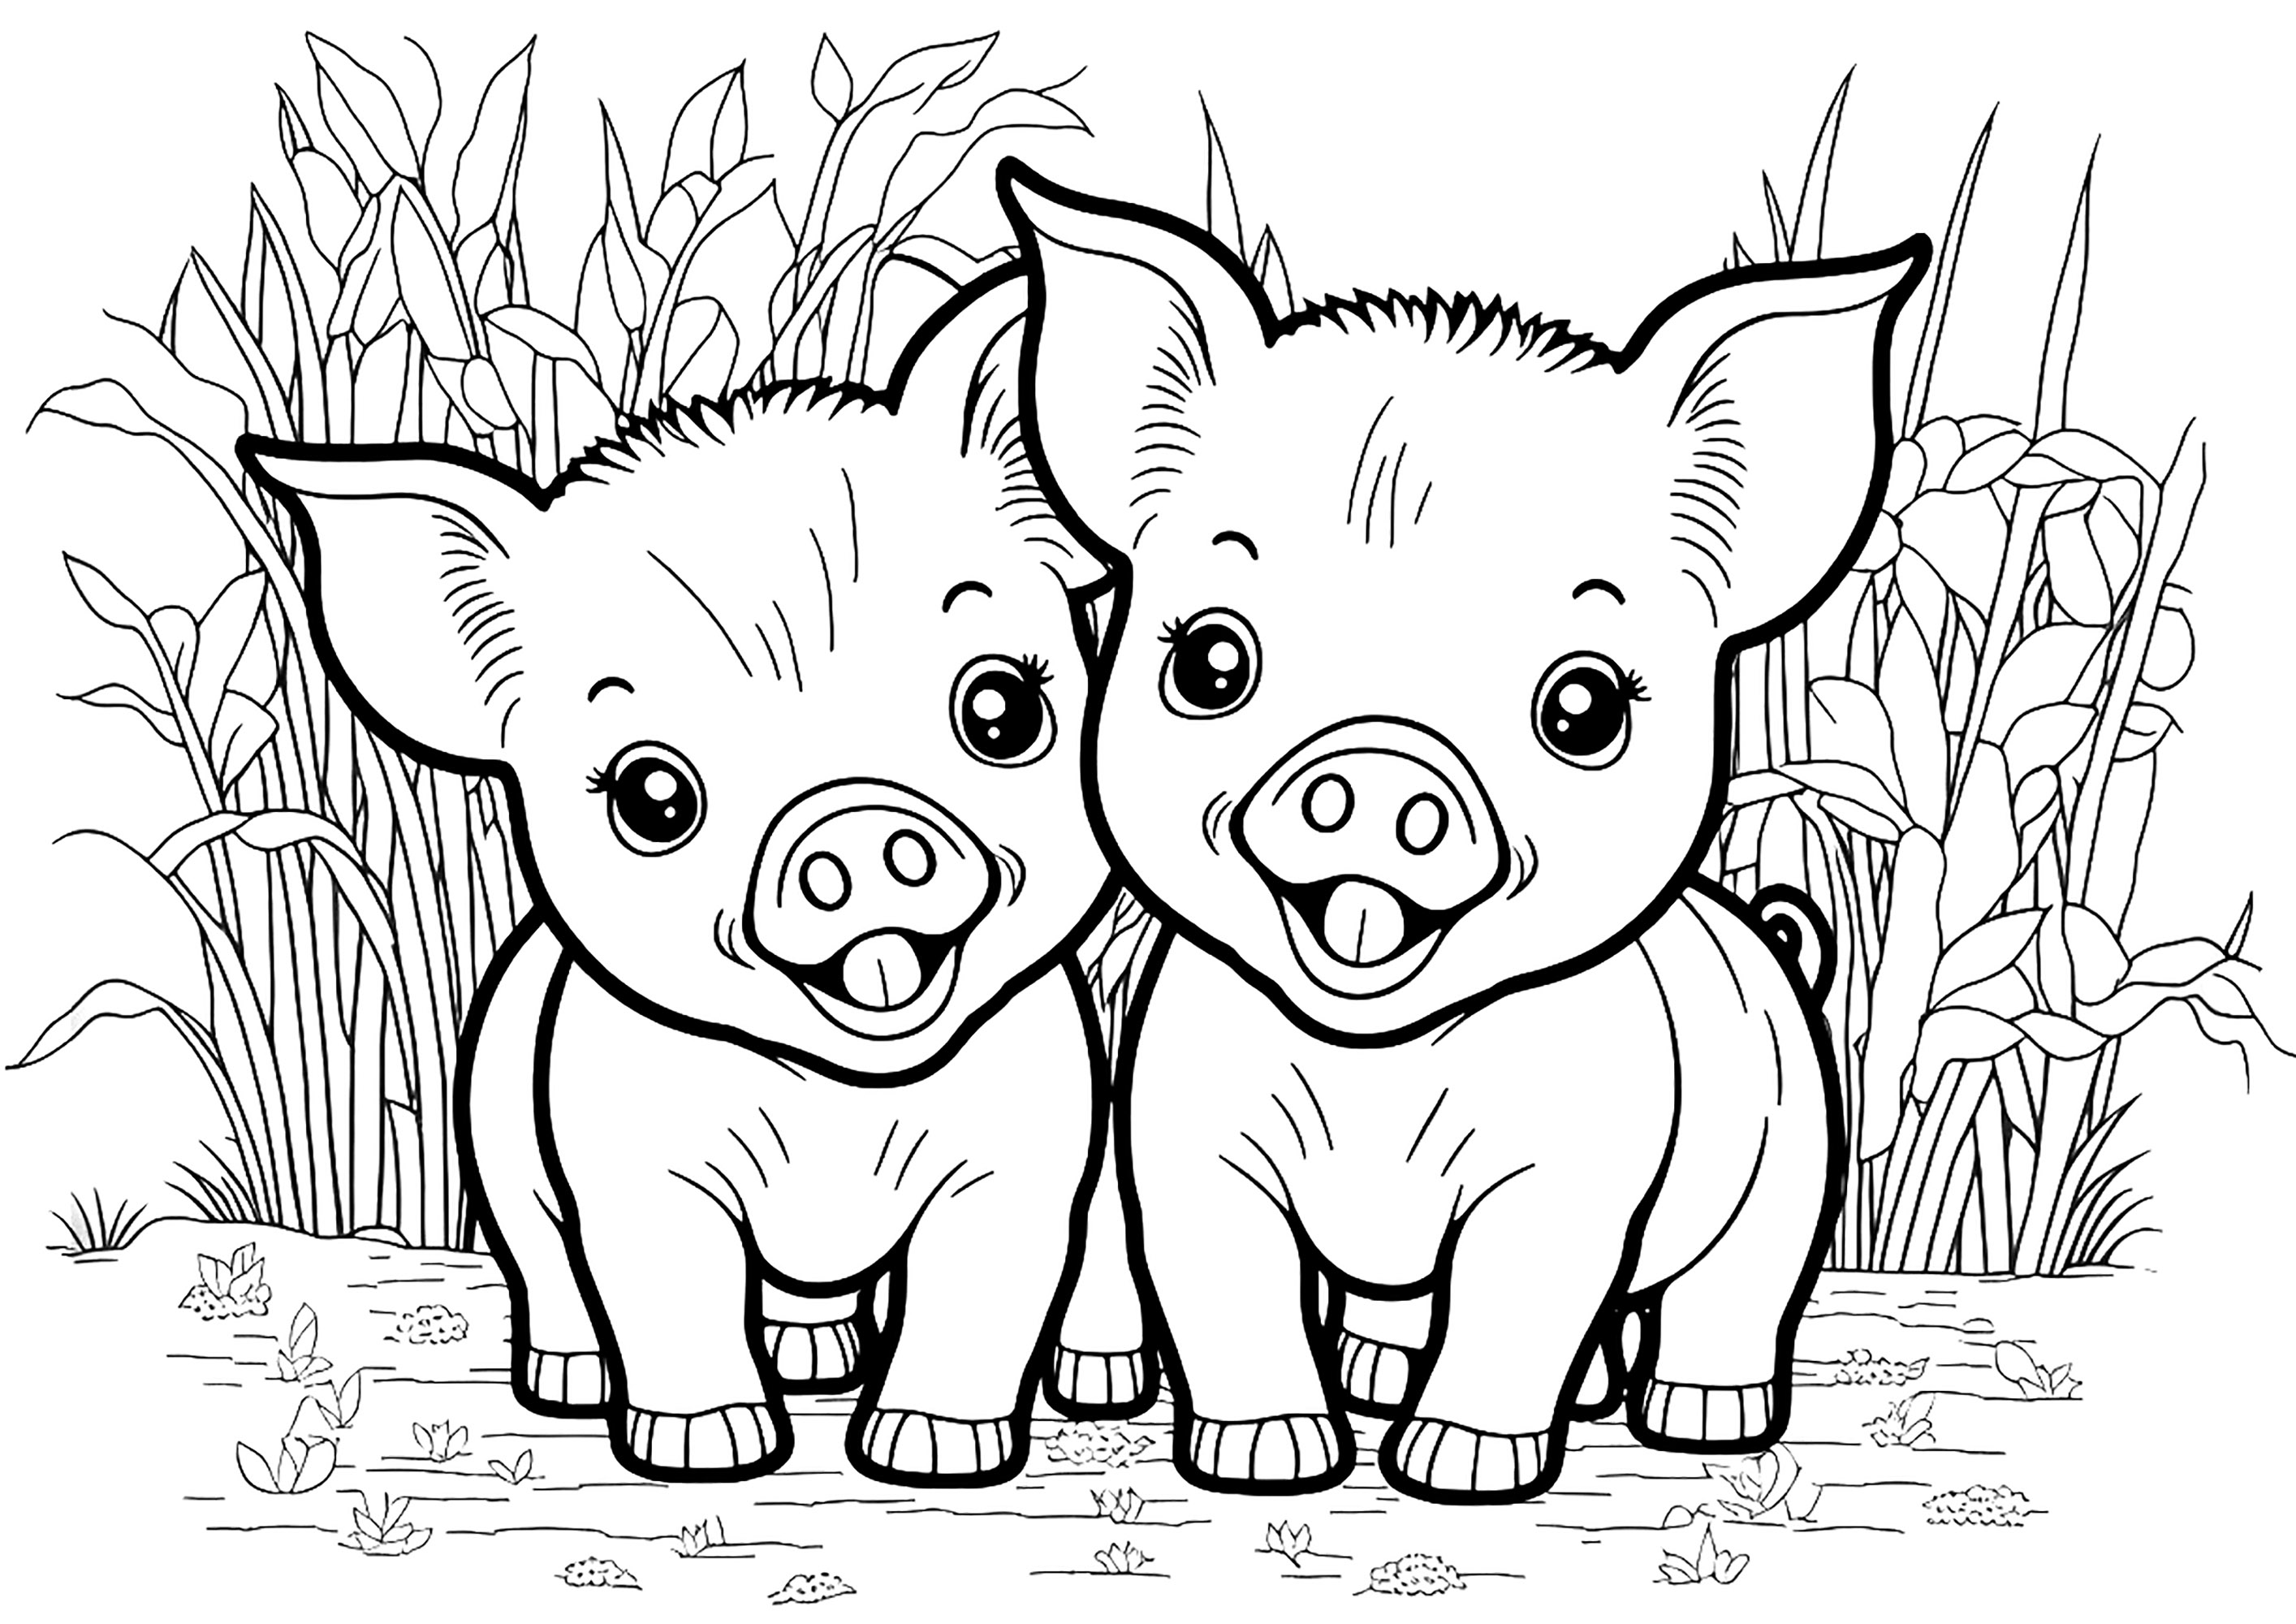 cute pig coloring page